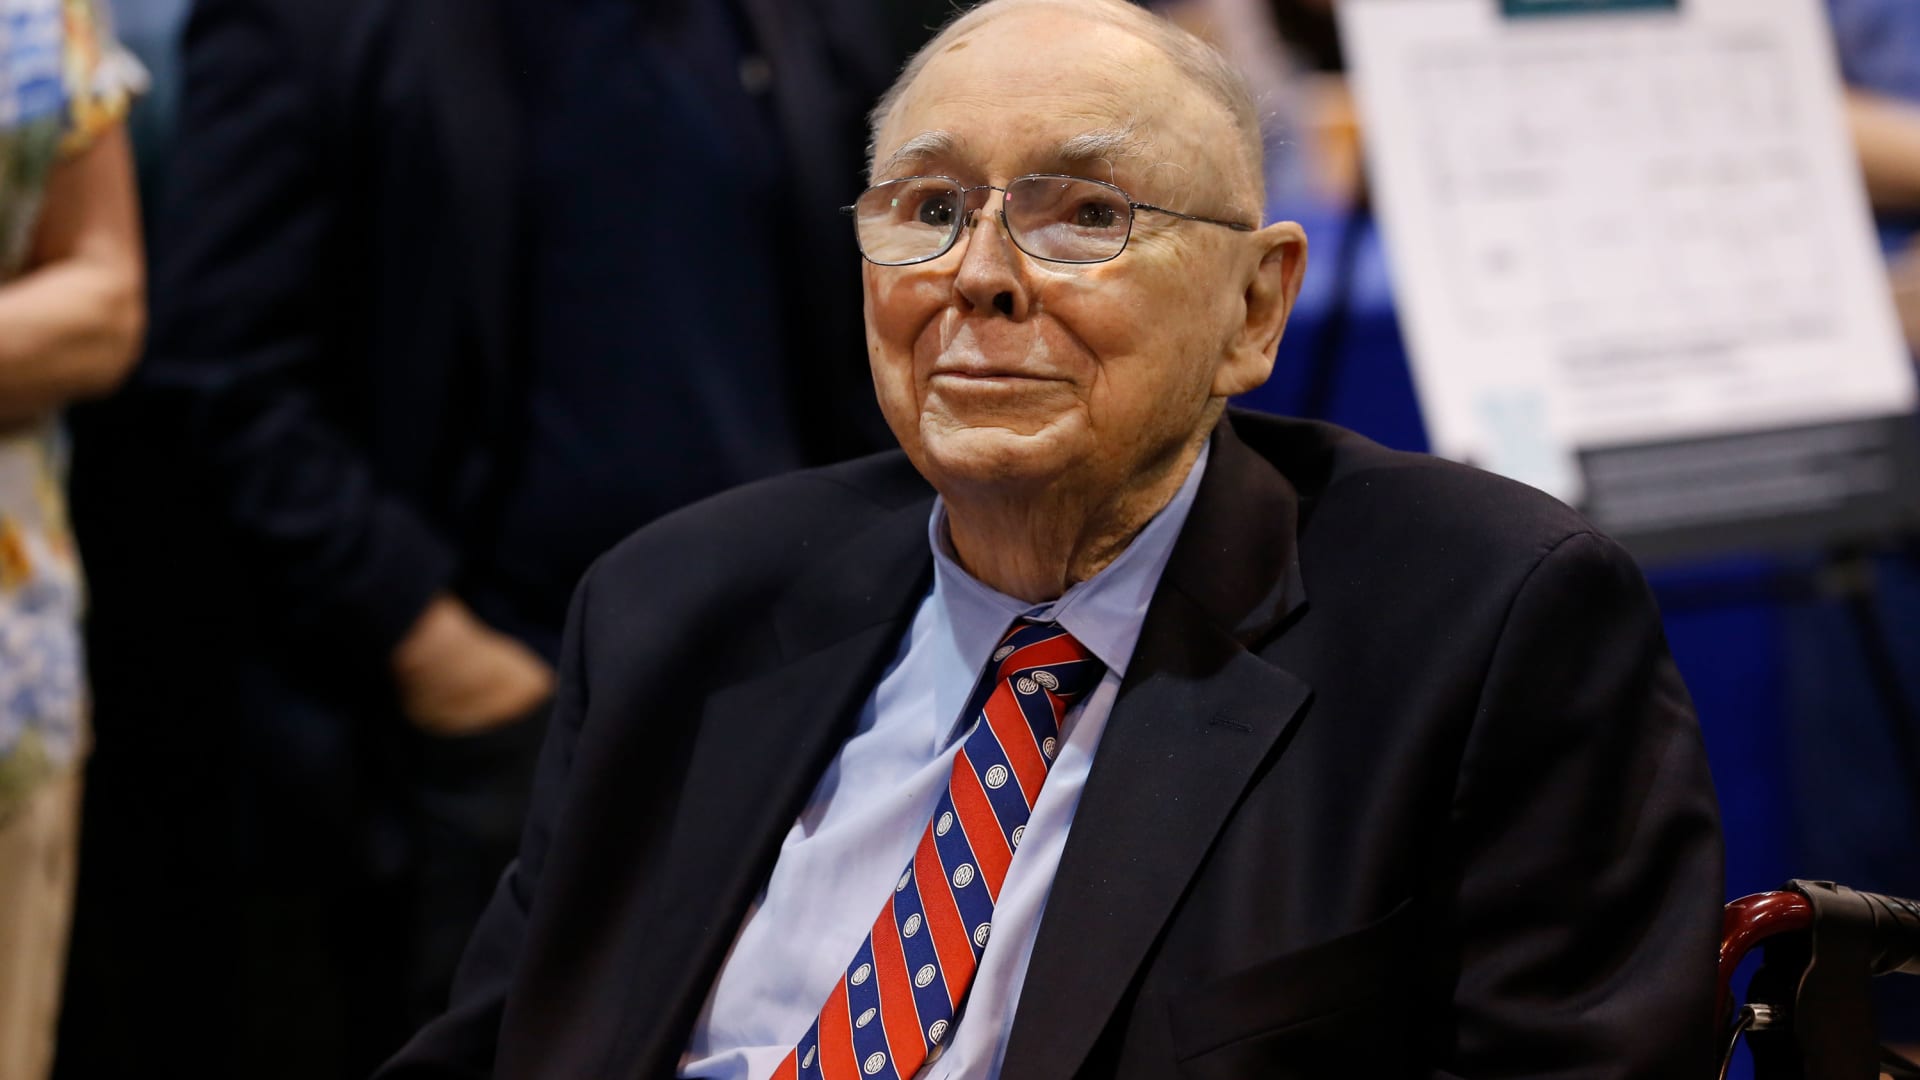 Charlie Munger calls success of Elon Musk's Tesla a 'minor miracle' in car business